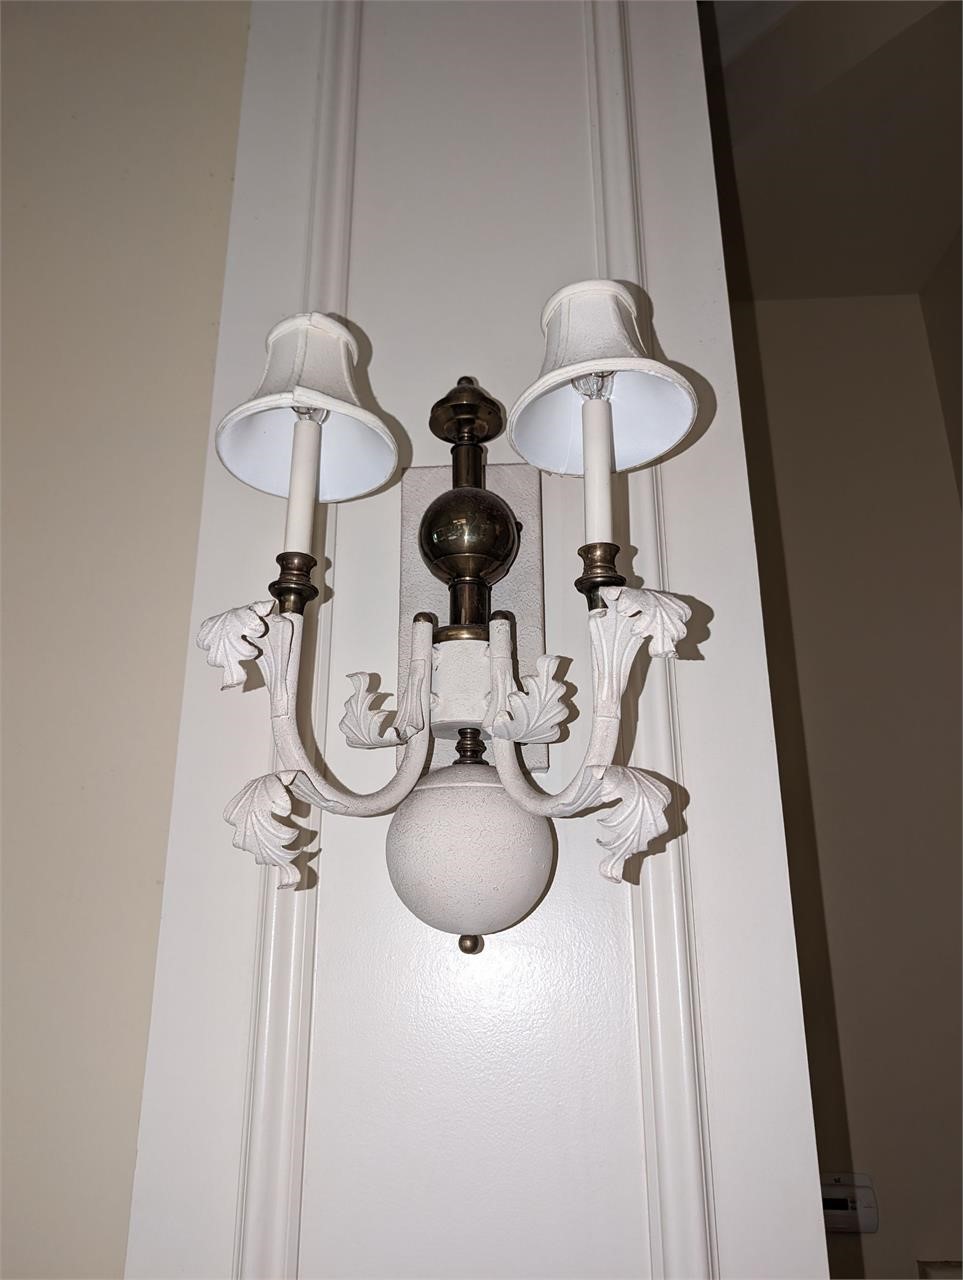 2 Pc. Wall Candlestick Style Sconce w/ Shades